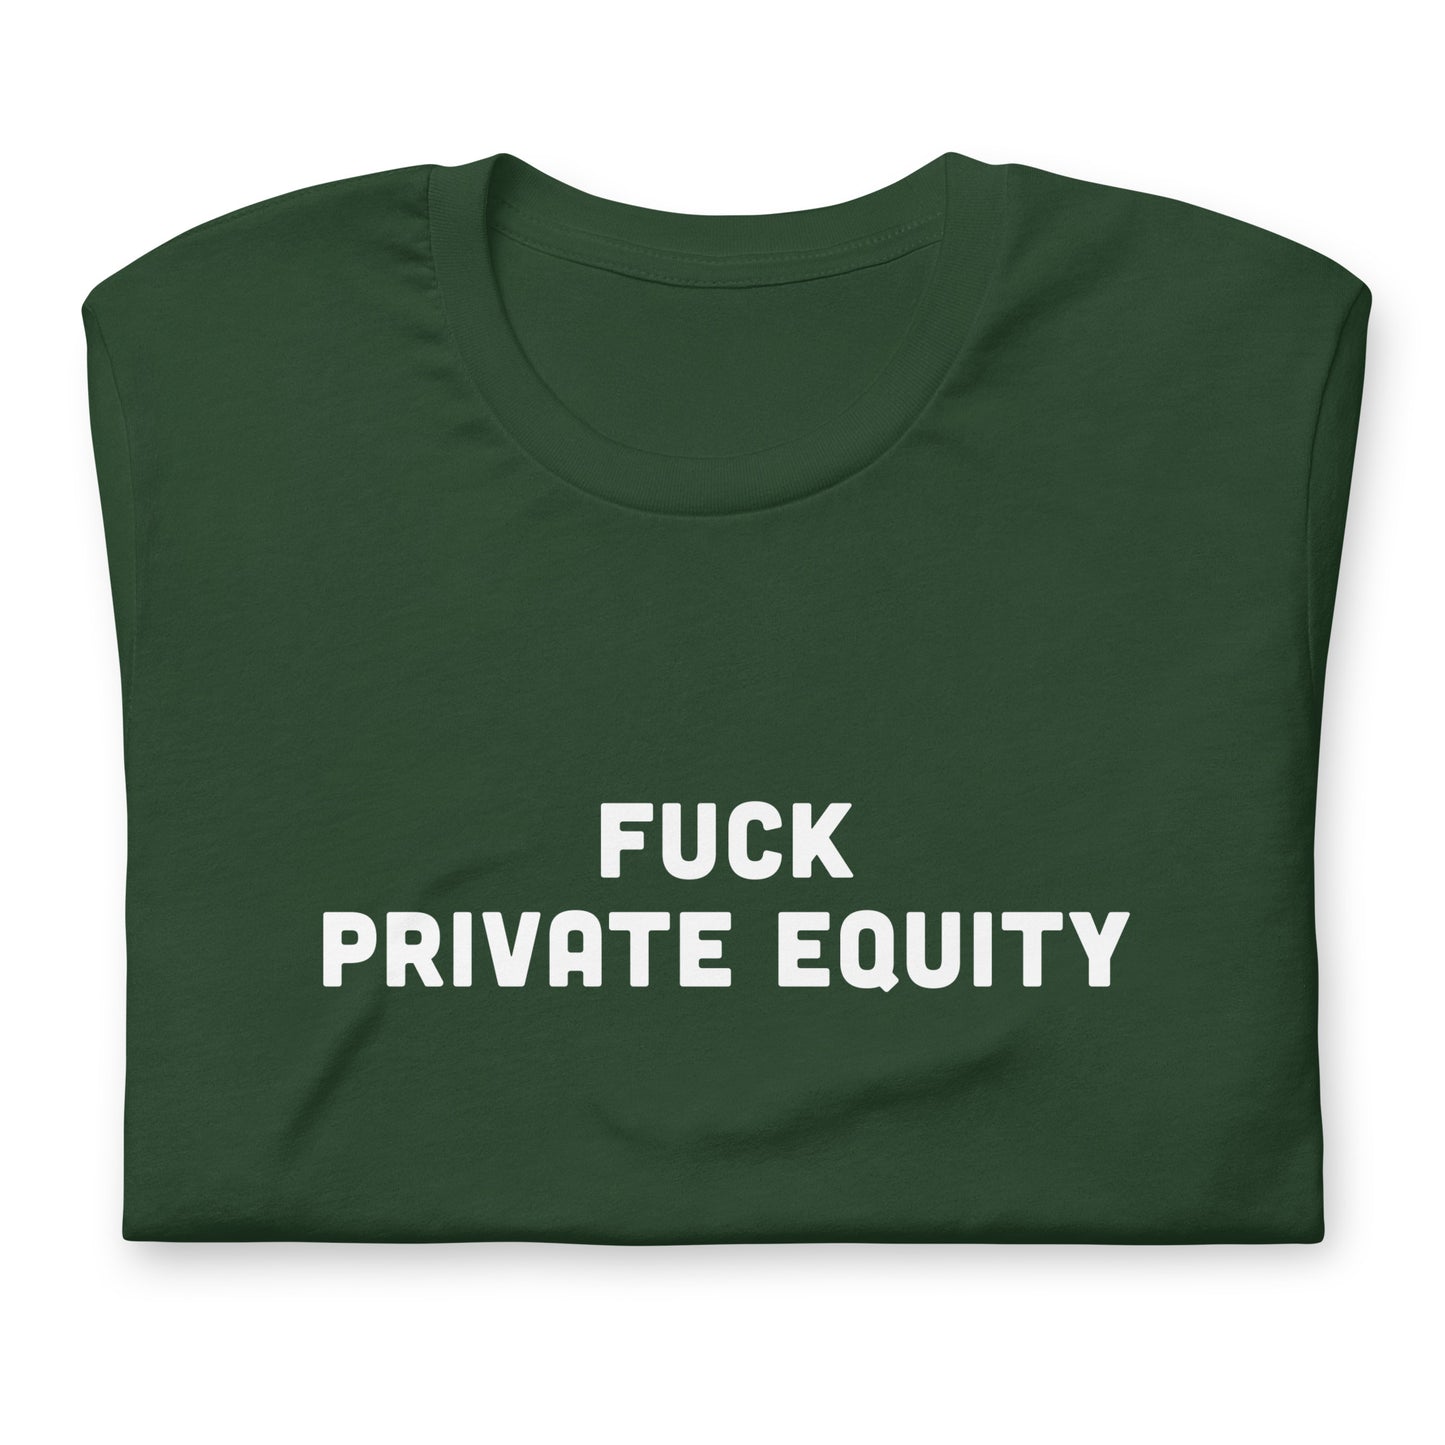 Fuck Private Equity T-Shirt Size XL Color Black